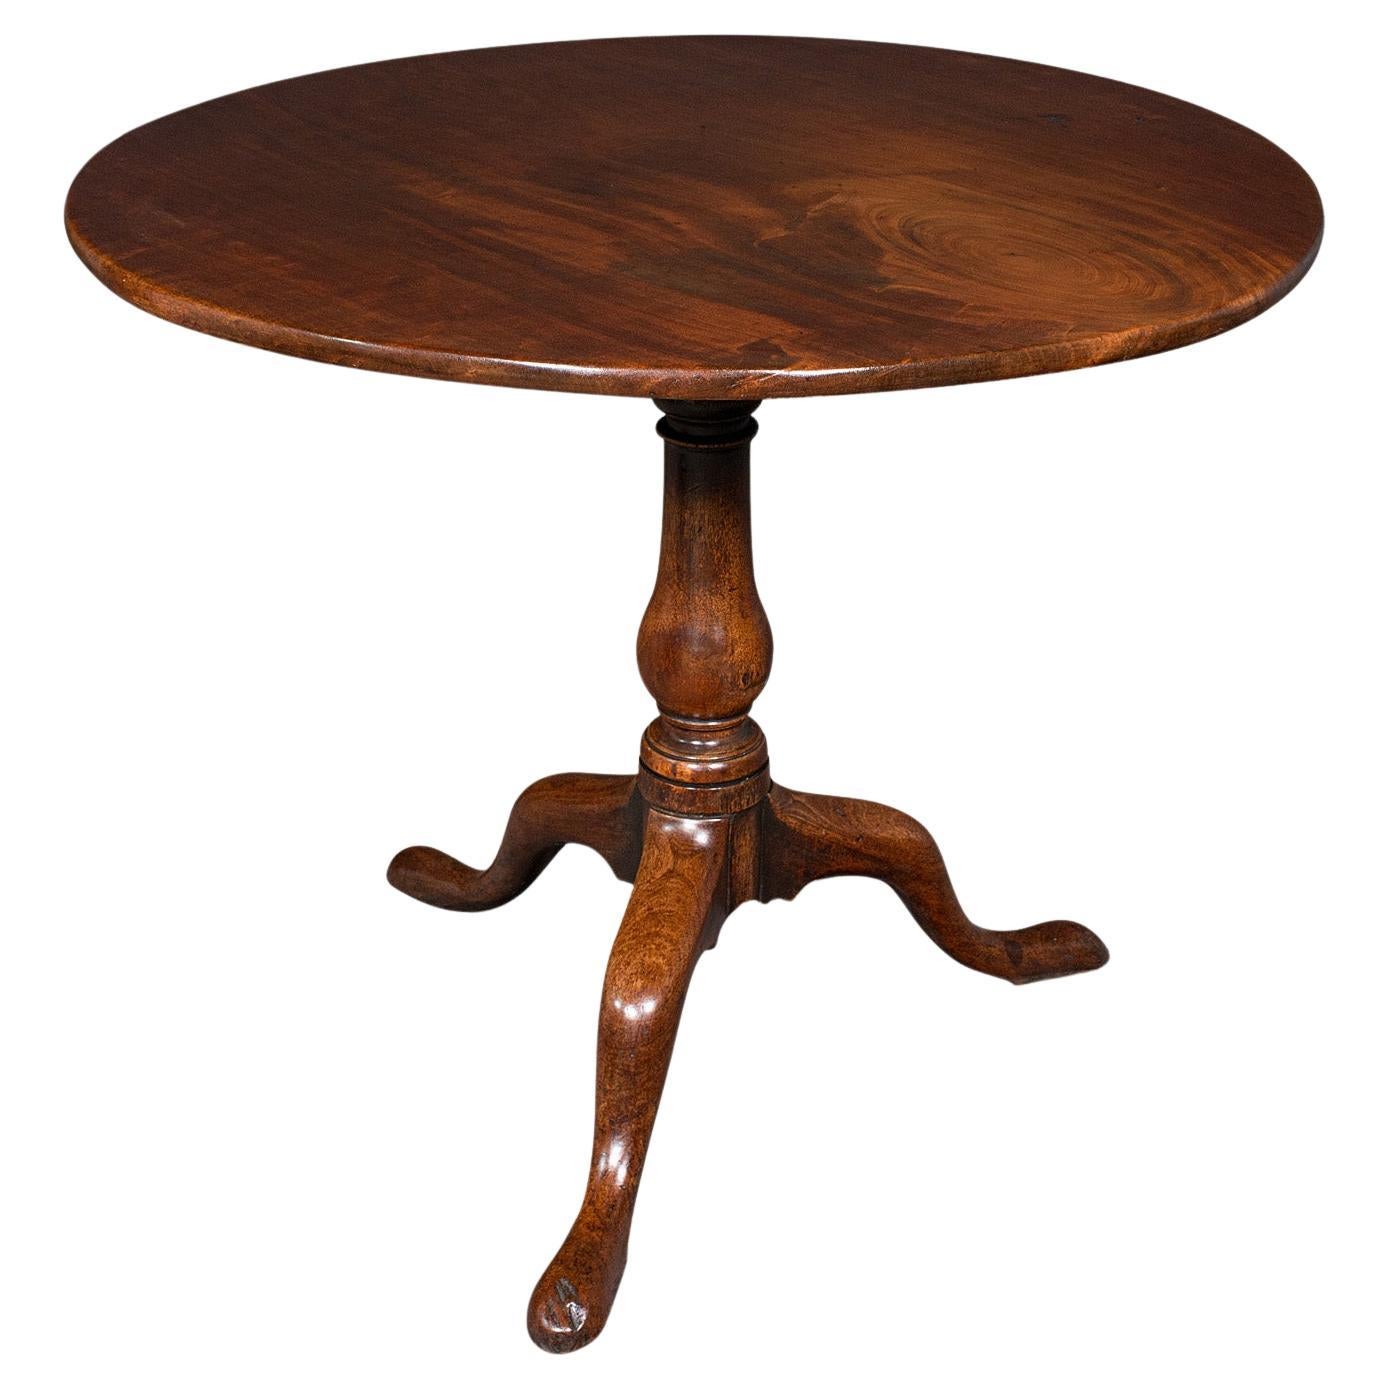 Antique Tilt Top Table, English, Mahogany, Side, Lamp, Rotary, Georgian, C.1760 For Sale